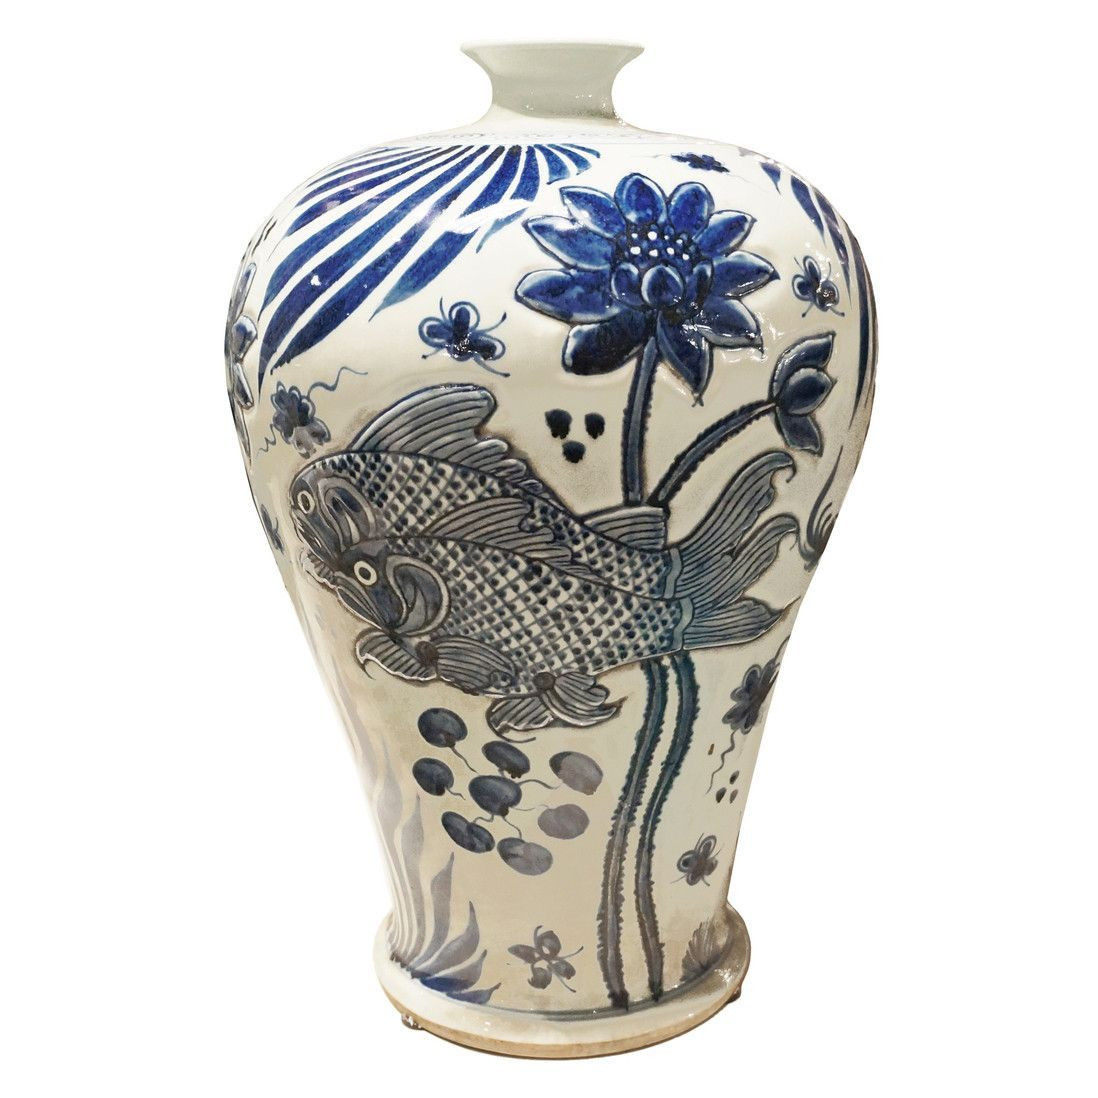 15 Recommended oriental Accent Vase 2024 free download oriental accent vase of carved fish chinoiserie plum vase blue white products with carved fish chinoiserie plum vase blue white